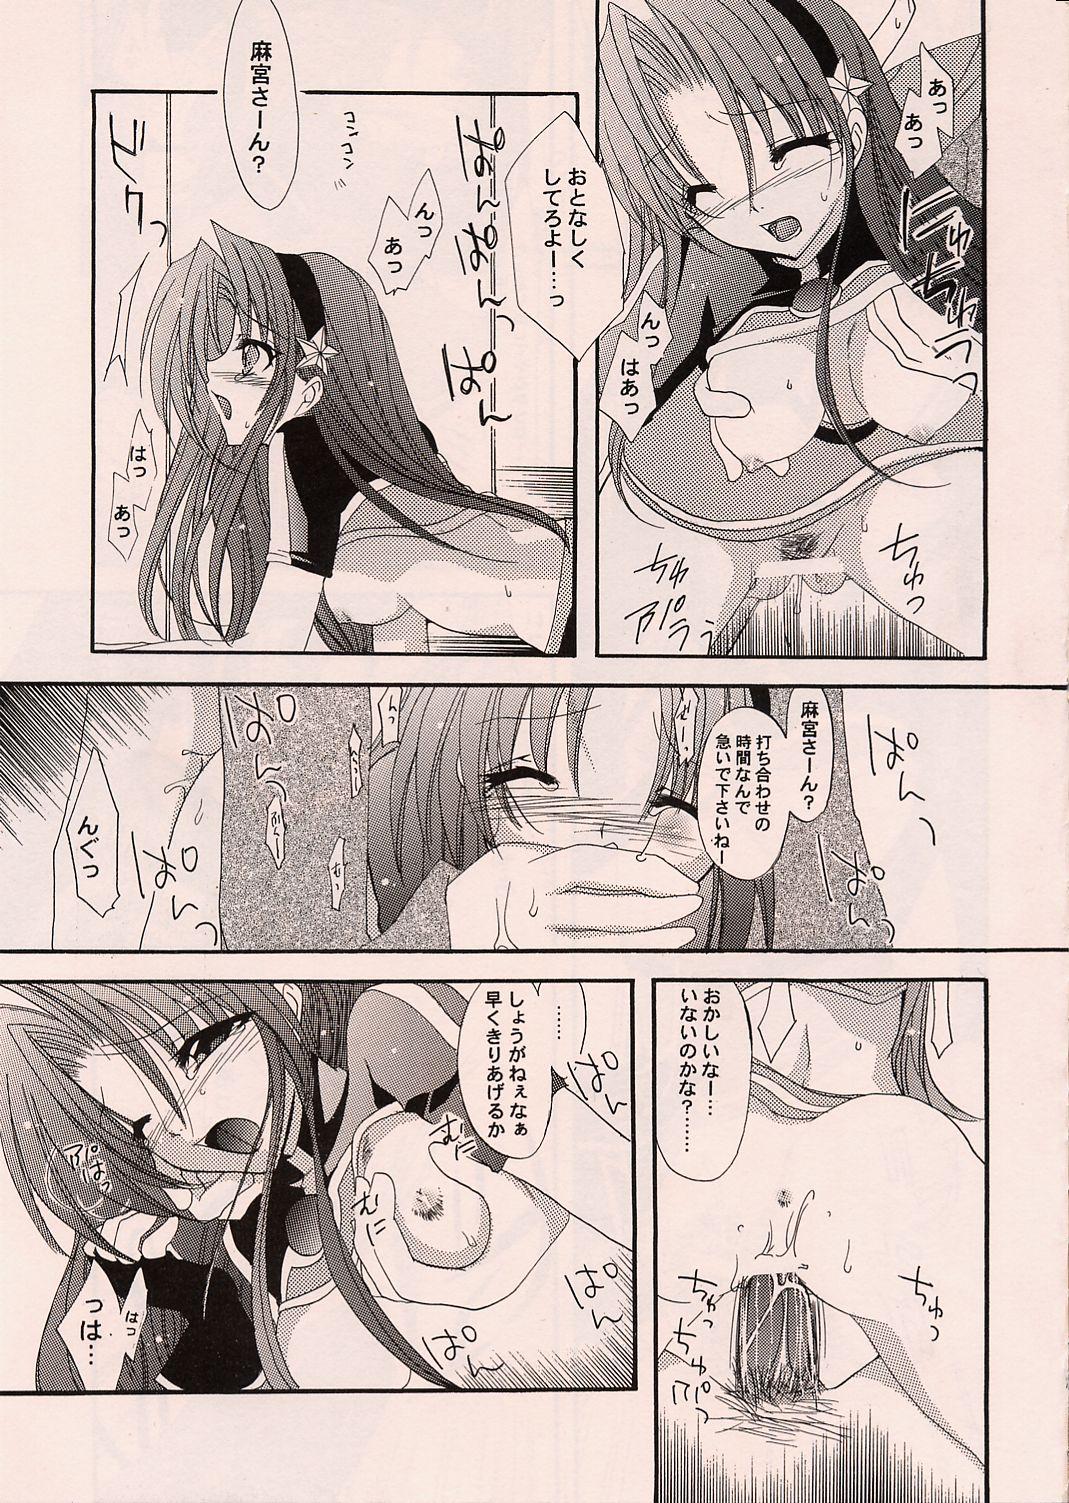 Follando HURRY! - King of fighters Boy Girl - Page 6